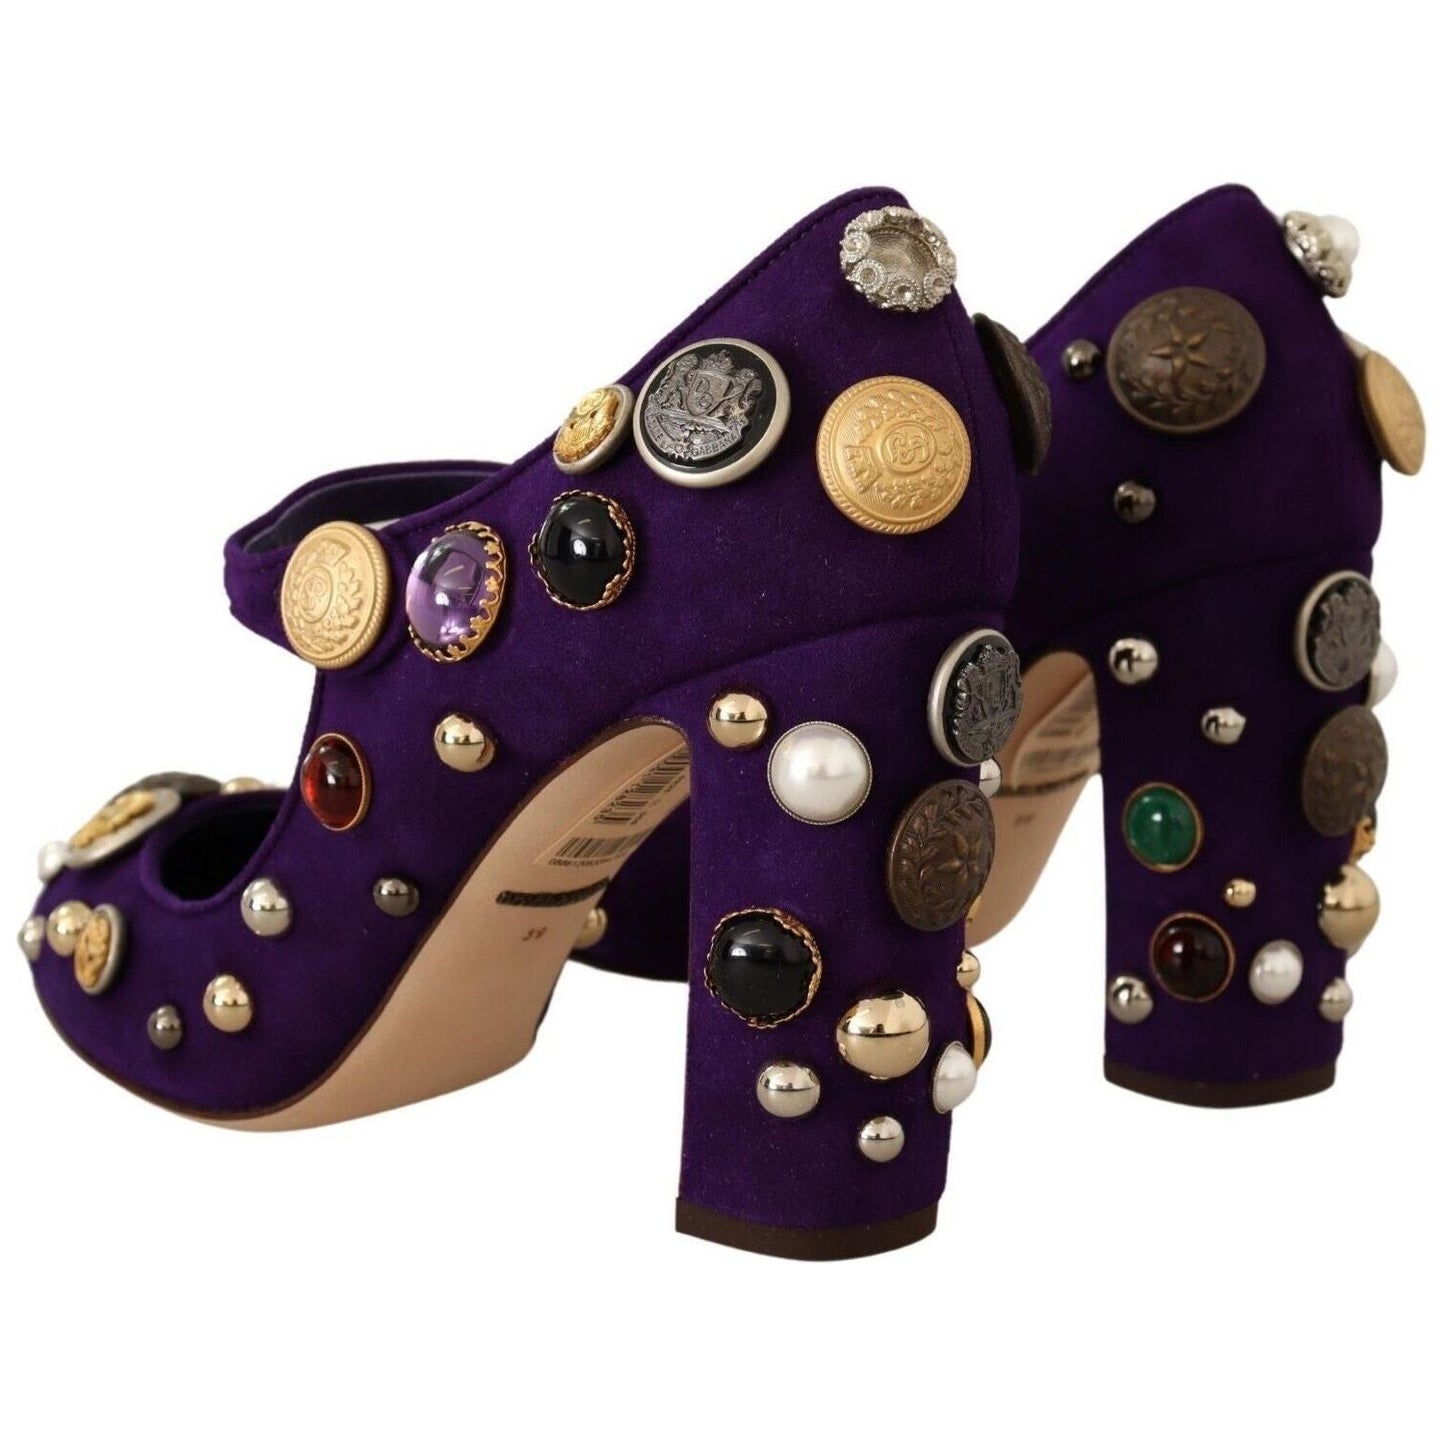 Dolce & Gabbana Elegant Suede Heels with Jewel Buttons Pumps purple-suede-embellished-pump-mary-jane-shoes s-l1600-2022-11-15T160650.804-fead5bce-e8c.jpg